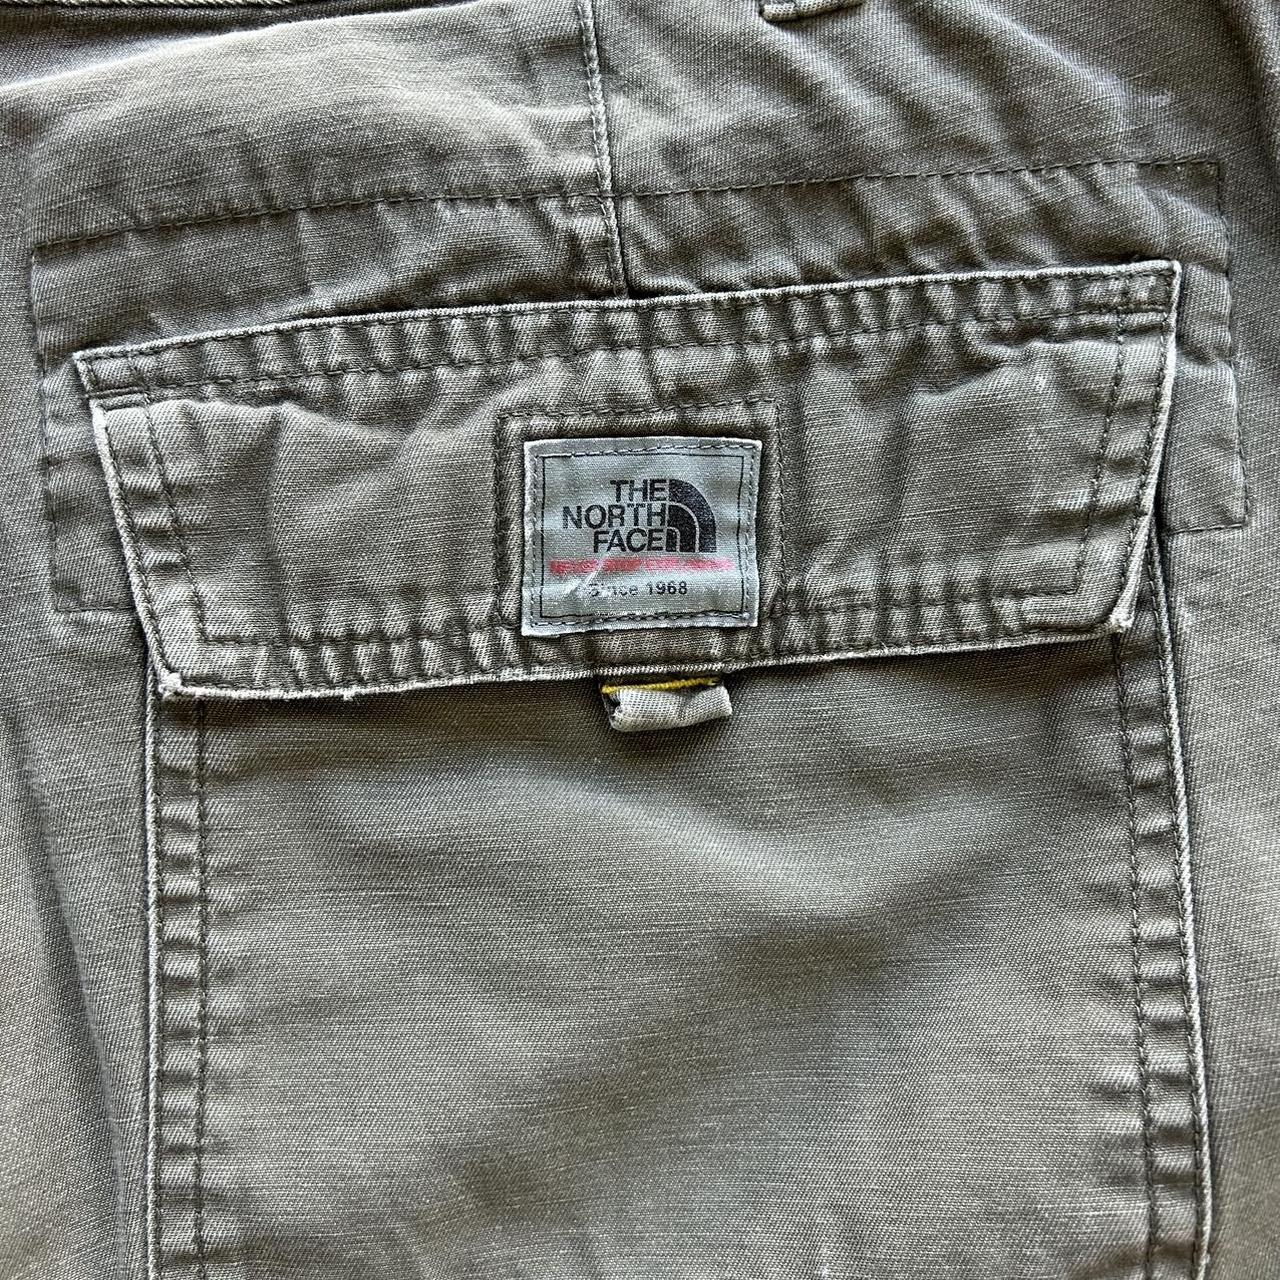 North Face A5 Series Cargo shorts Size 36